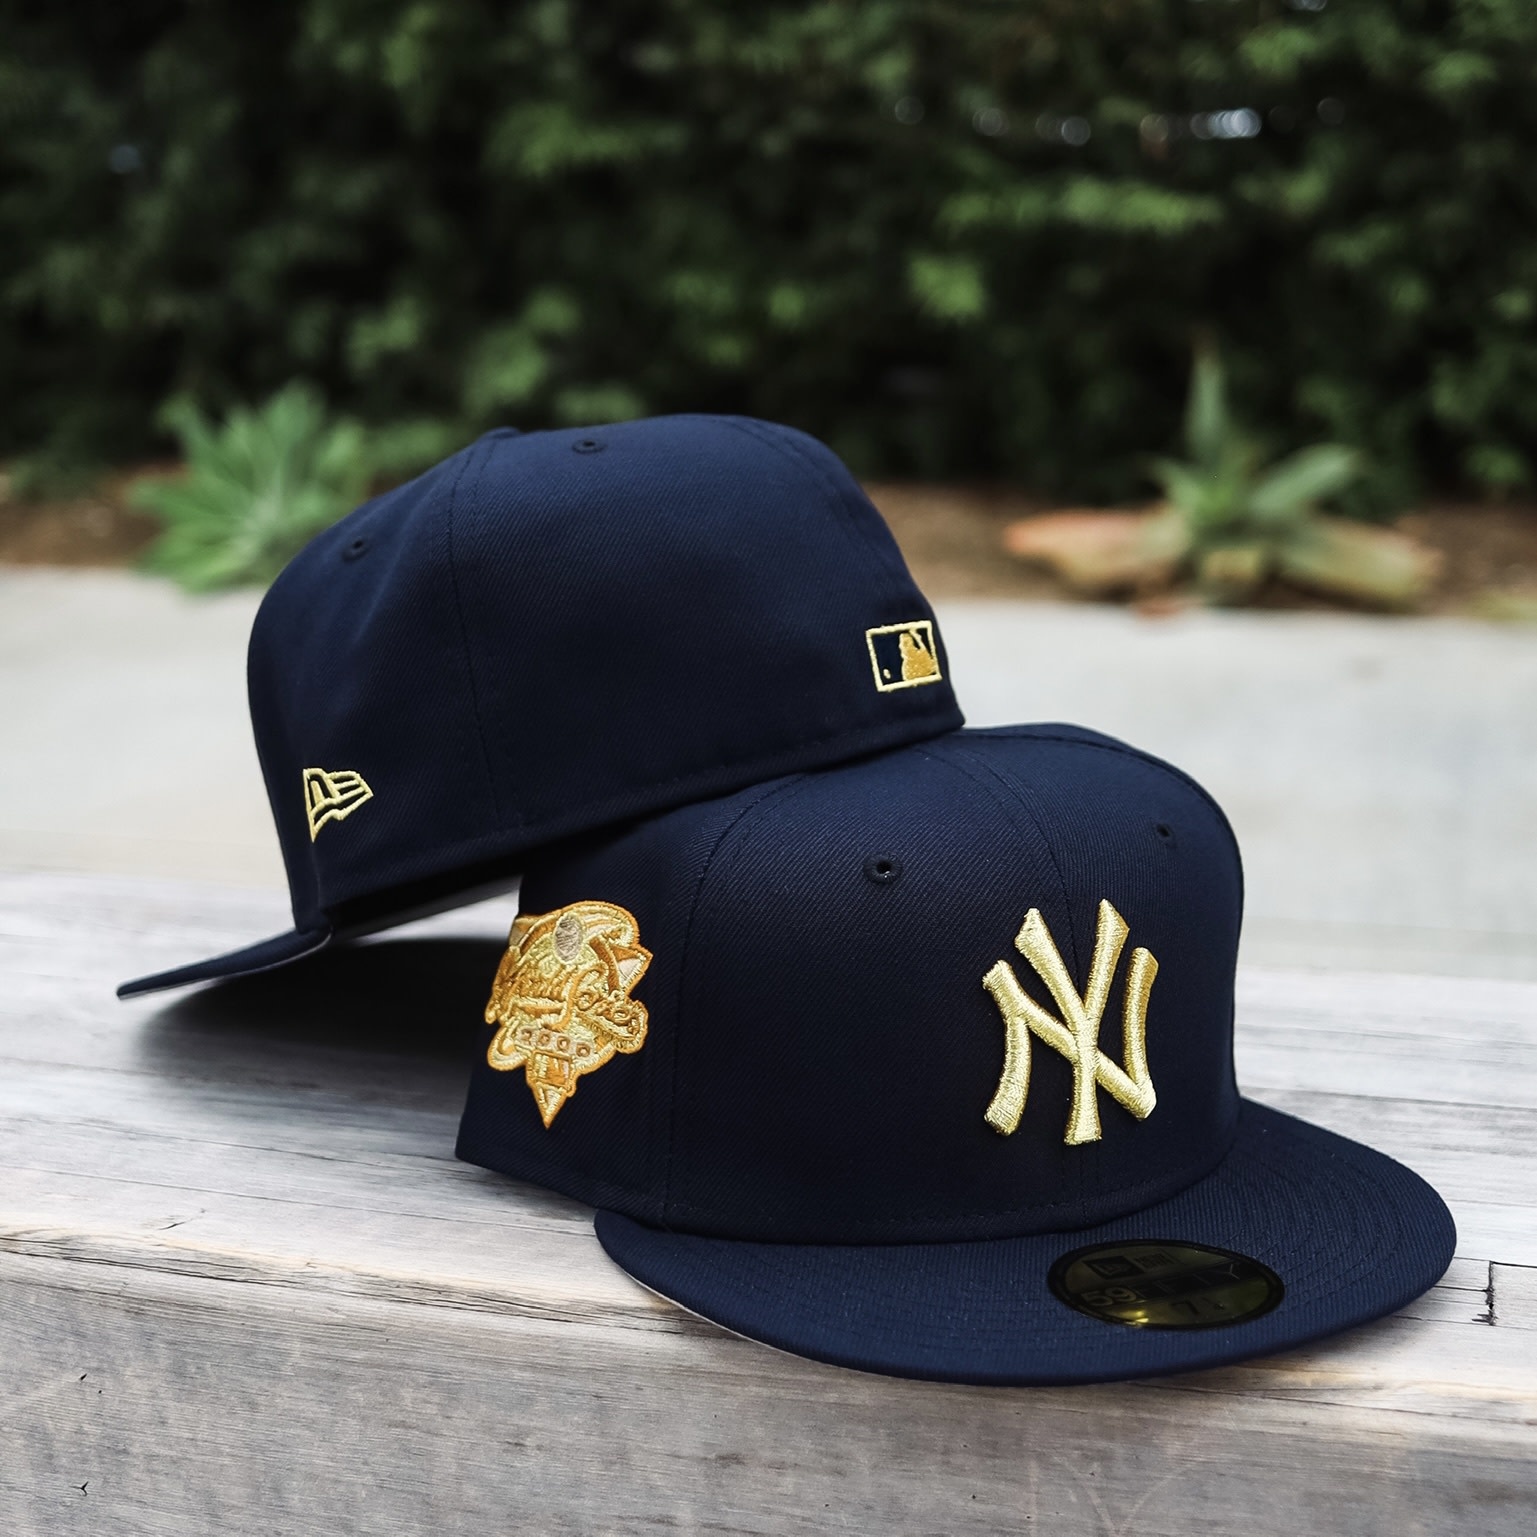 black and gold hat